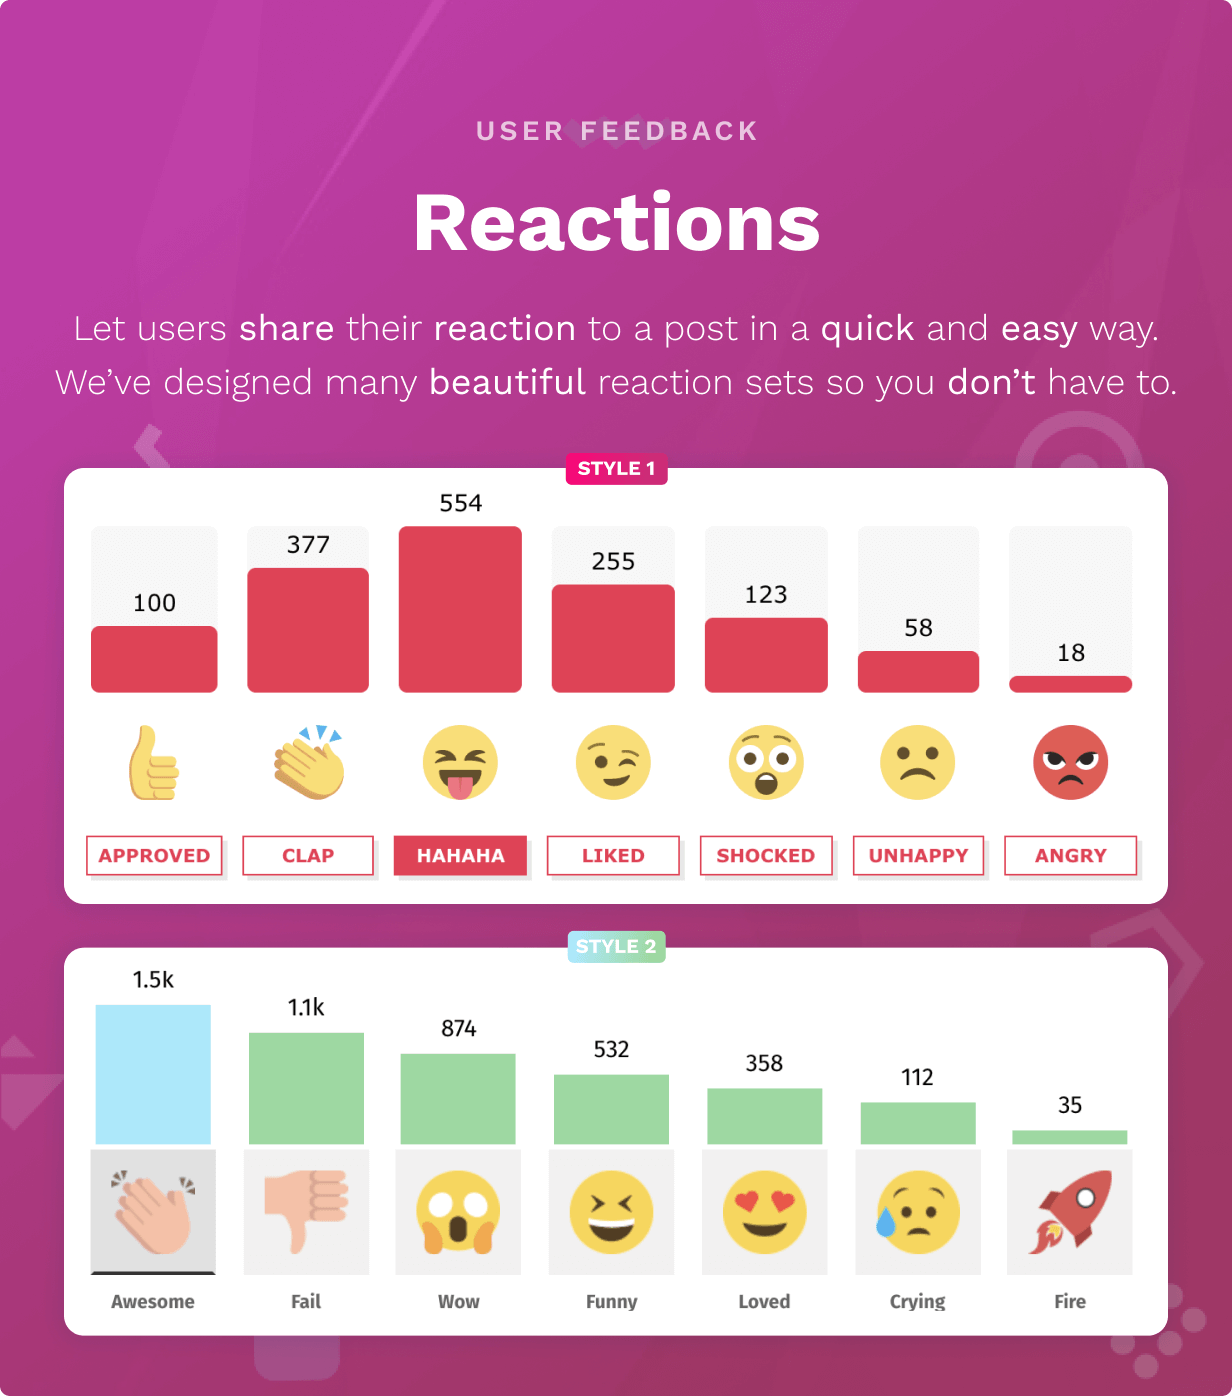 Reactions